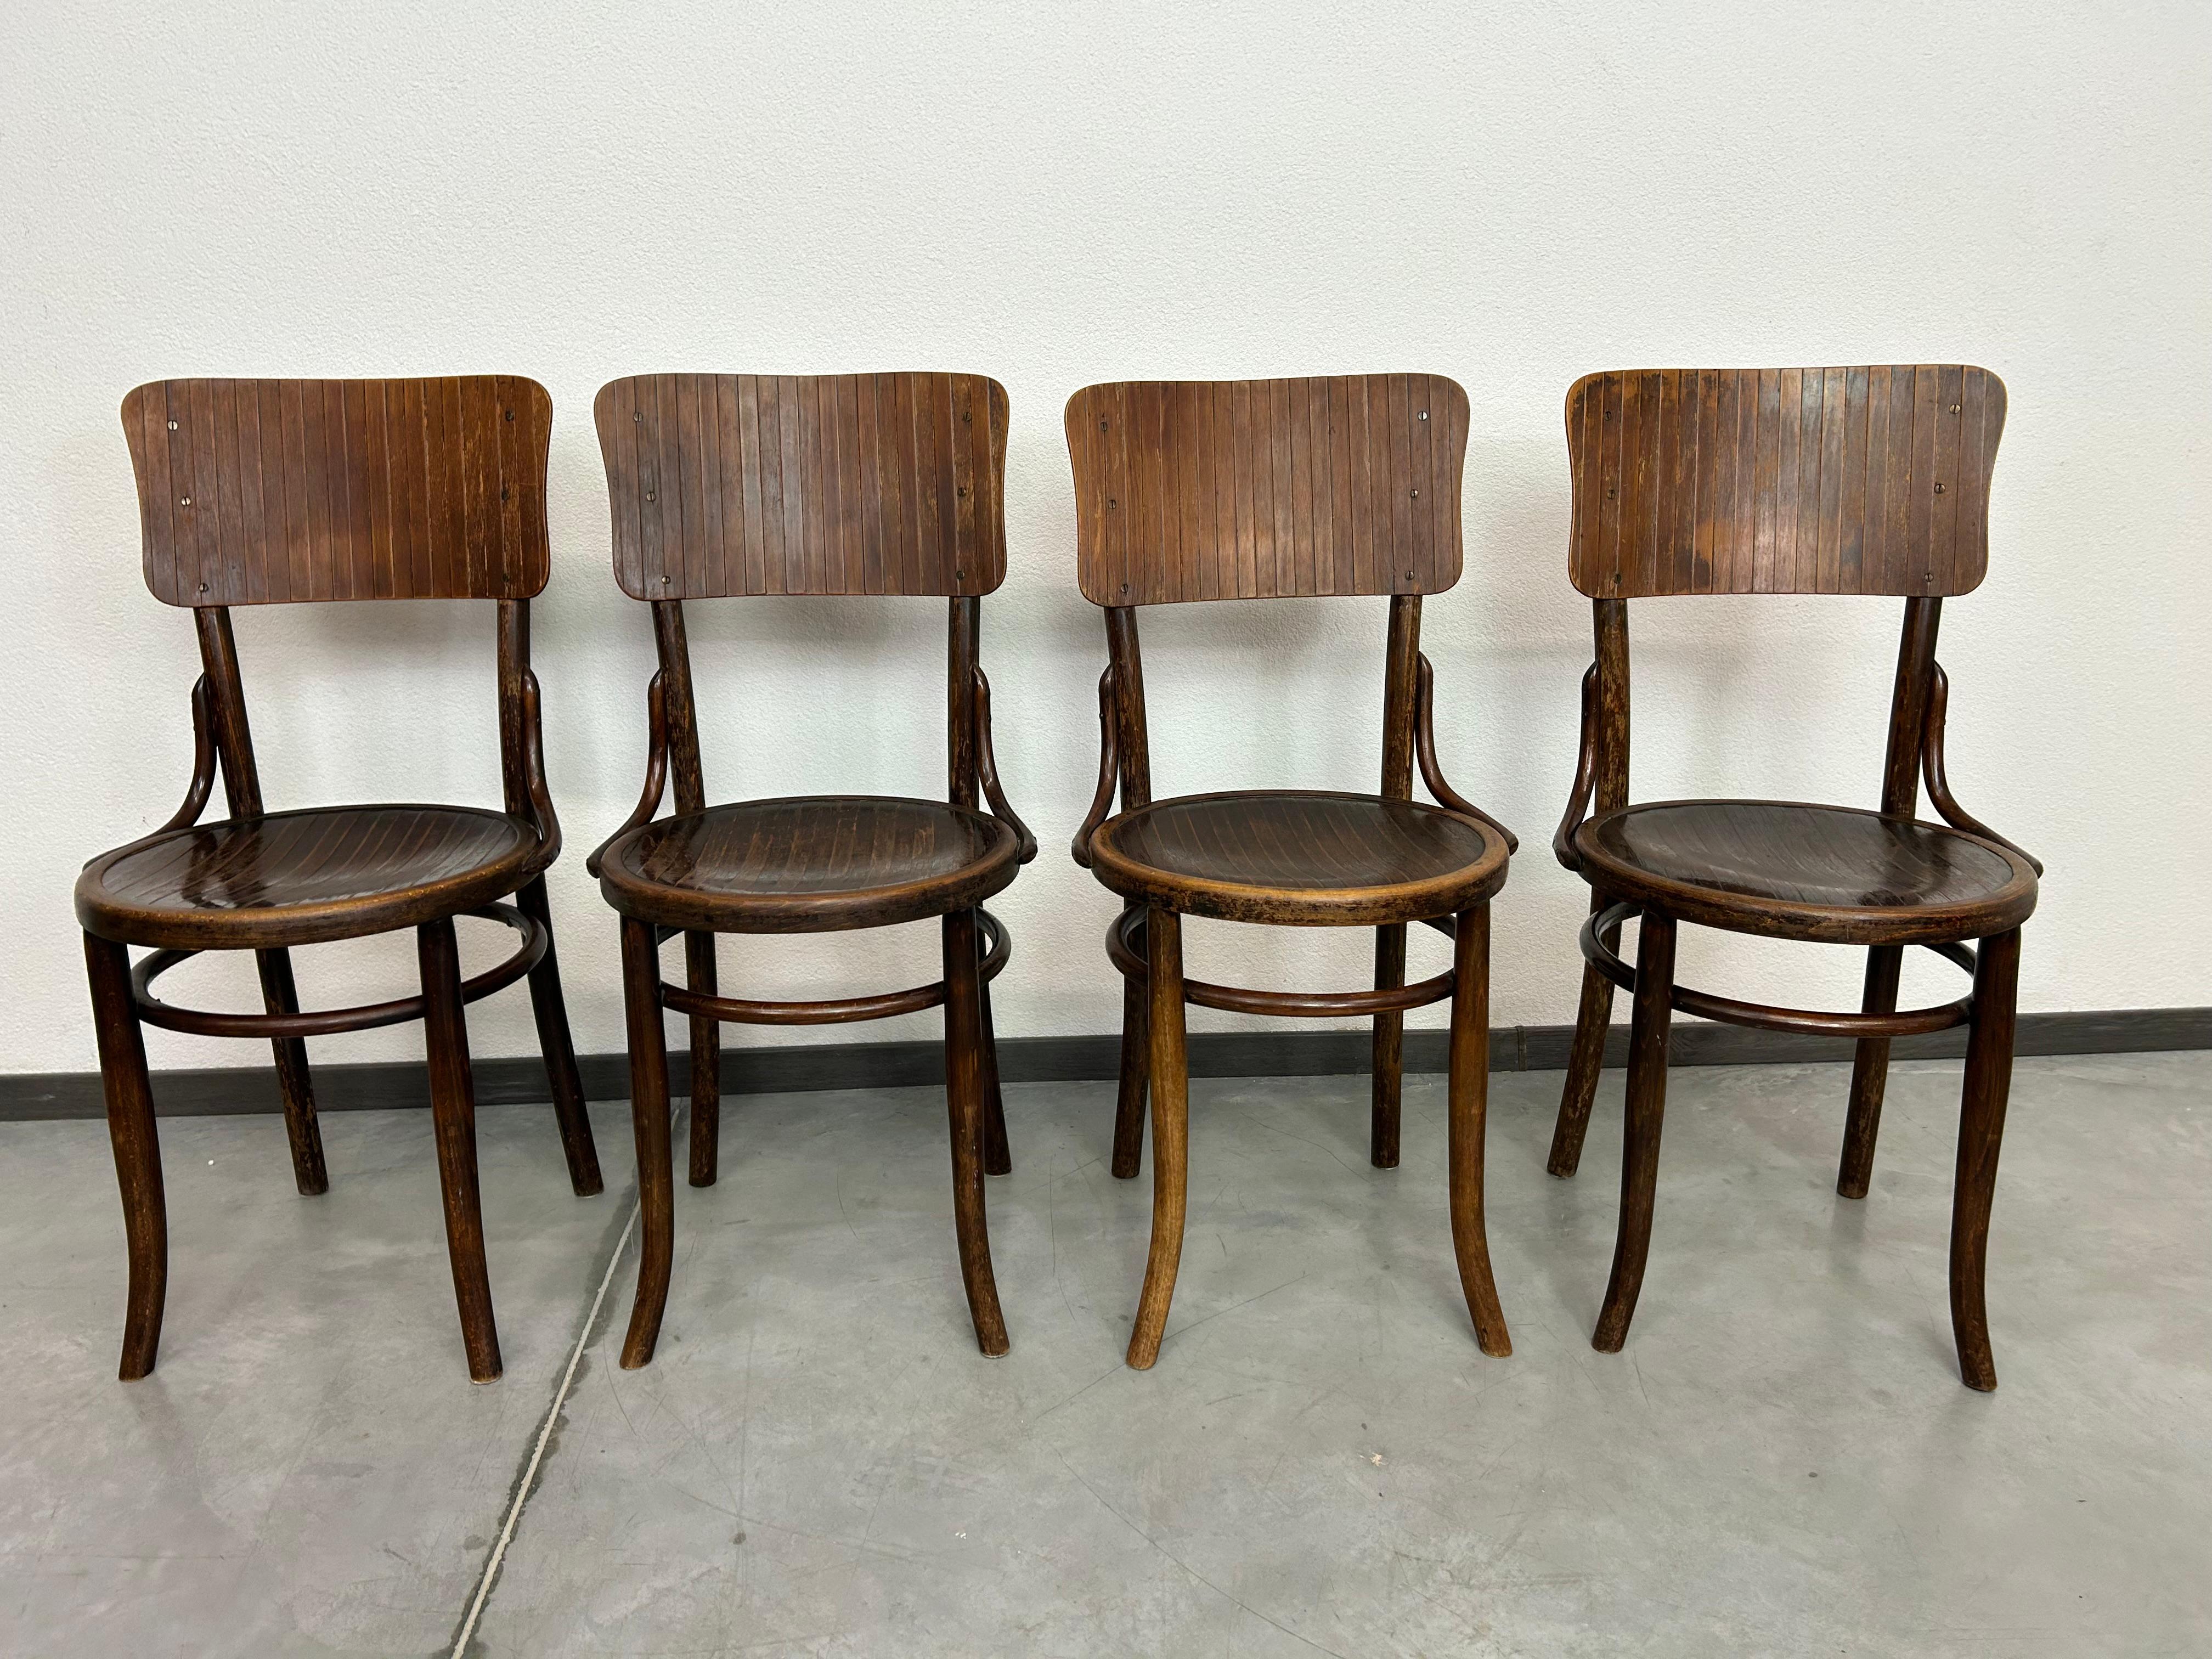 Set of 4 dining room chairs by Thonet Mundus in original vintage condition.